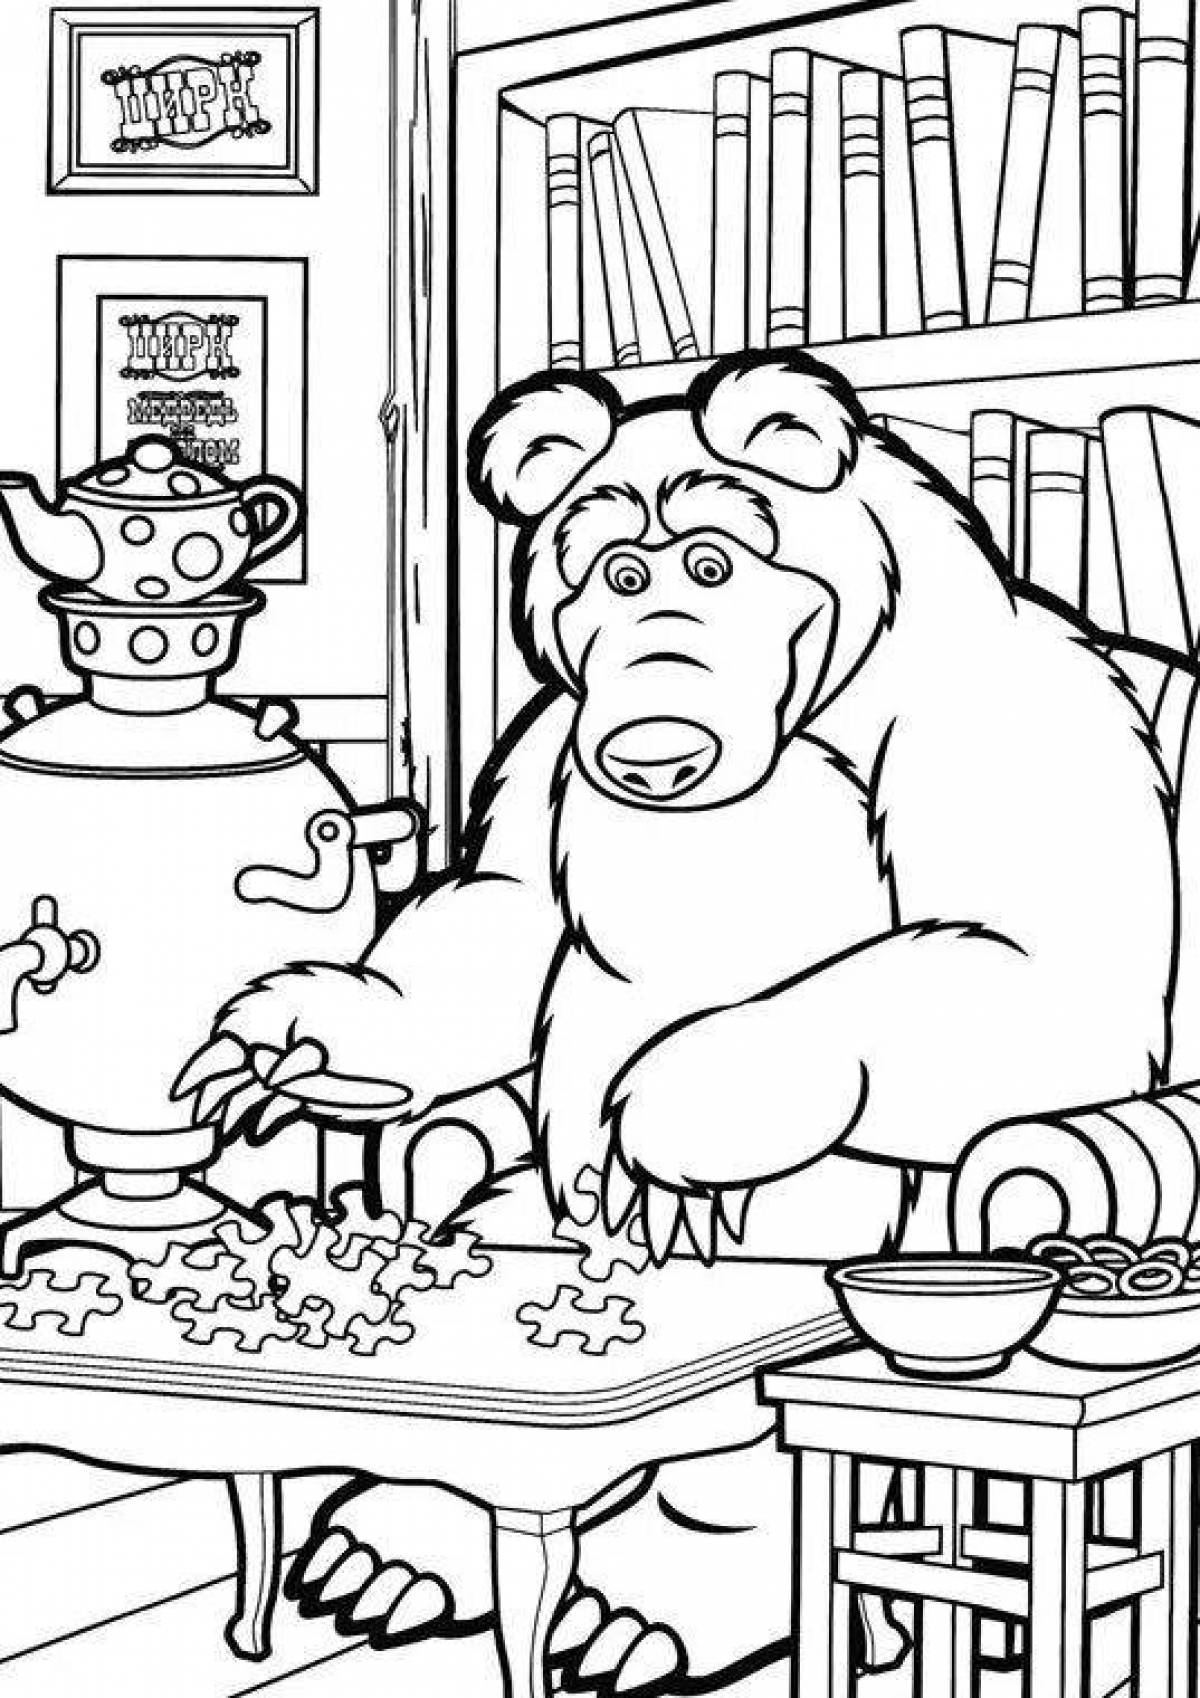 Coloring page Festive bear